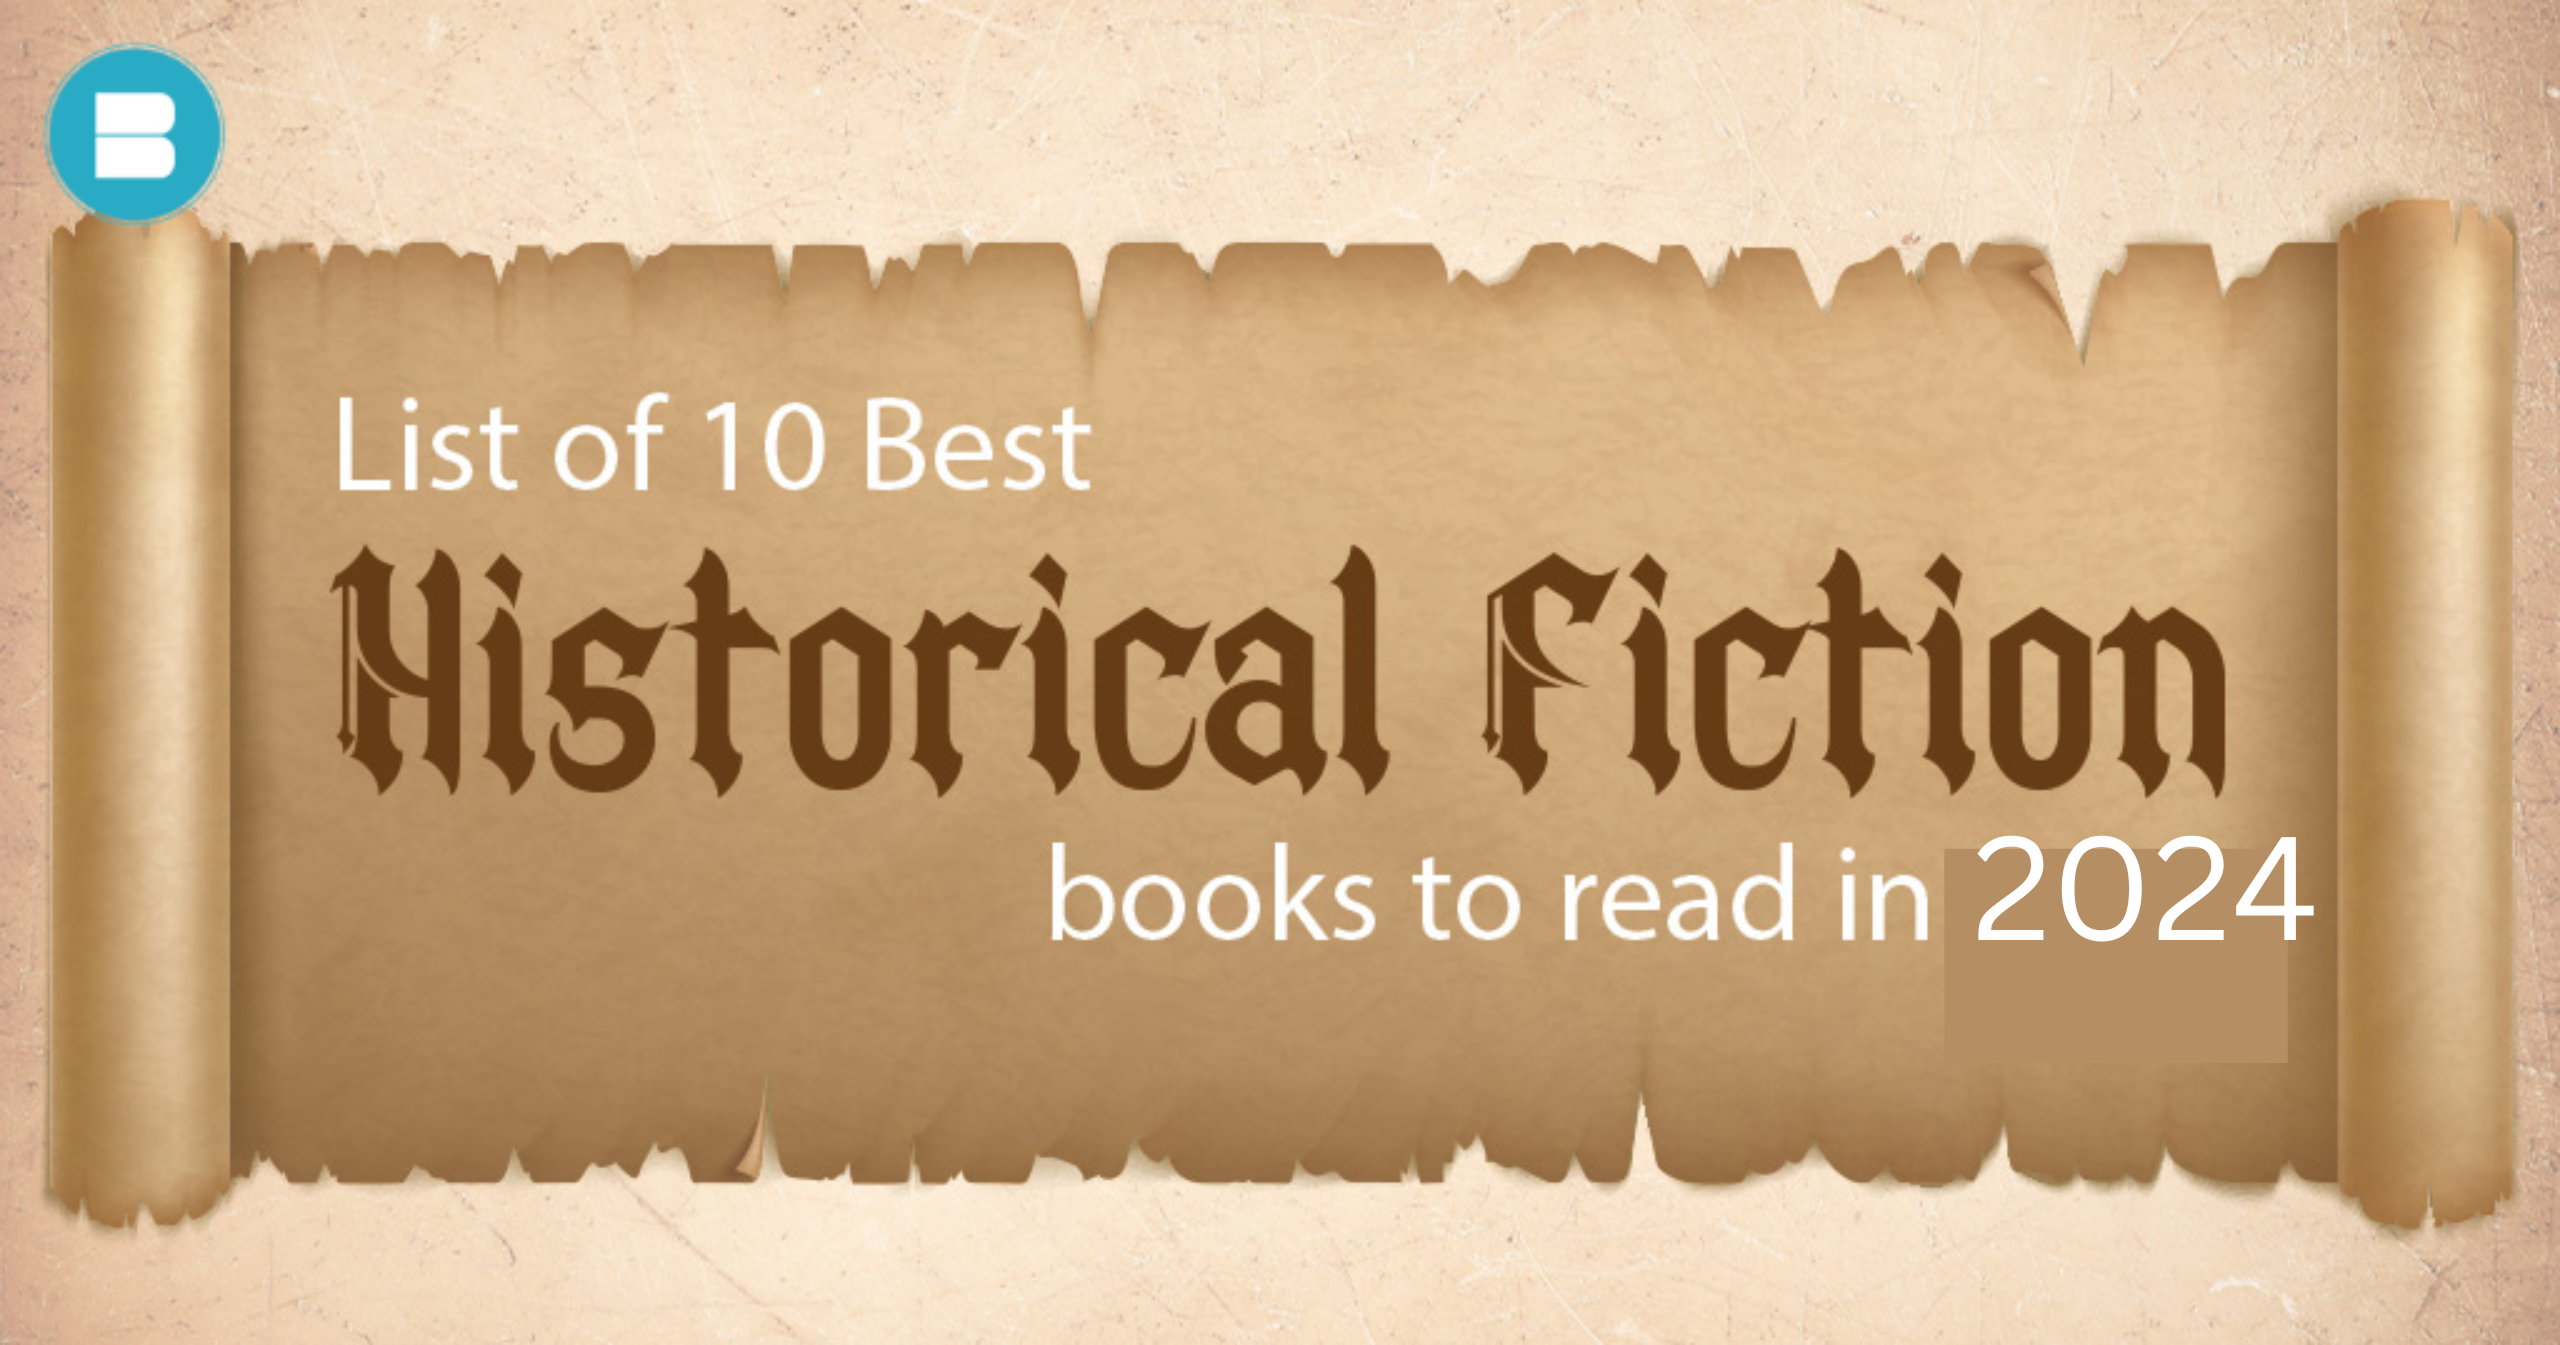 List of 10 Best Historical Fiction Books to Read in 2024